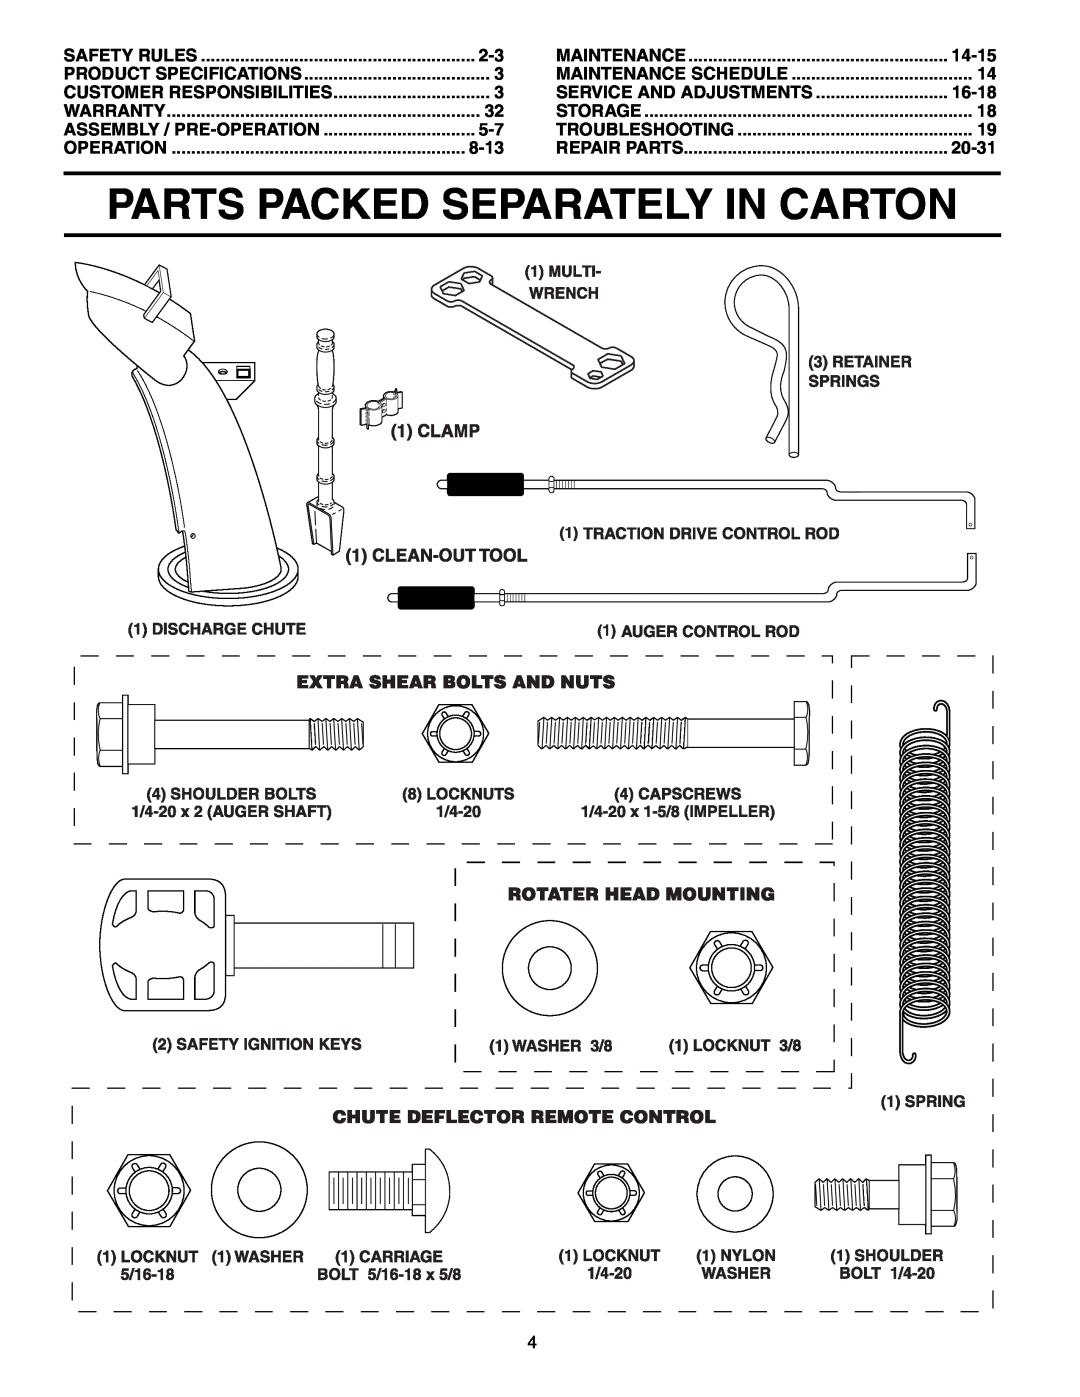 Poulan PP927ESC owner manual Parts Packed Separately In Carton, 8-13, 14-15, Service And Adjustments, 16-18, 20-31 